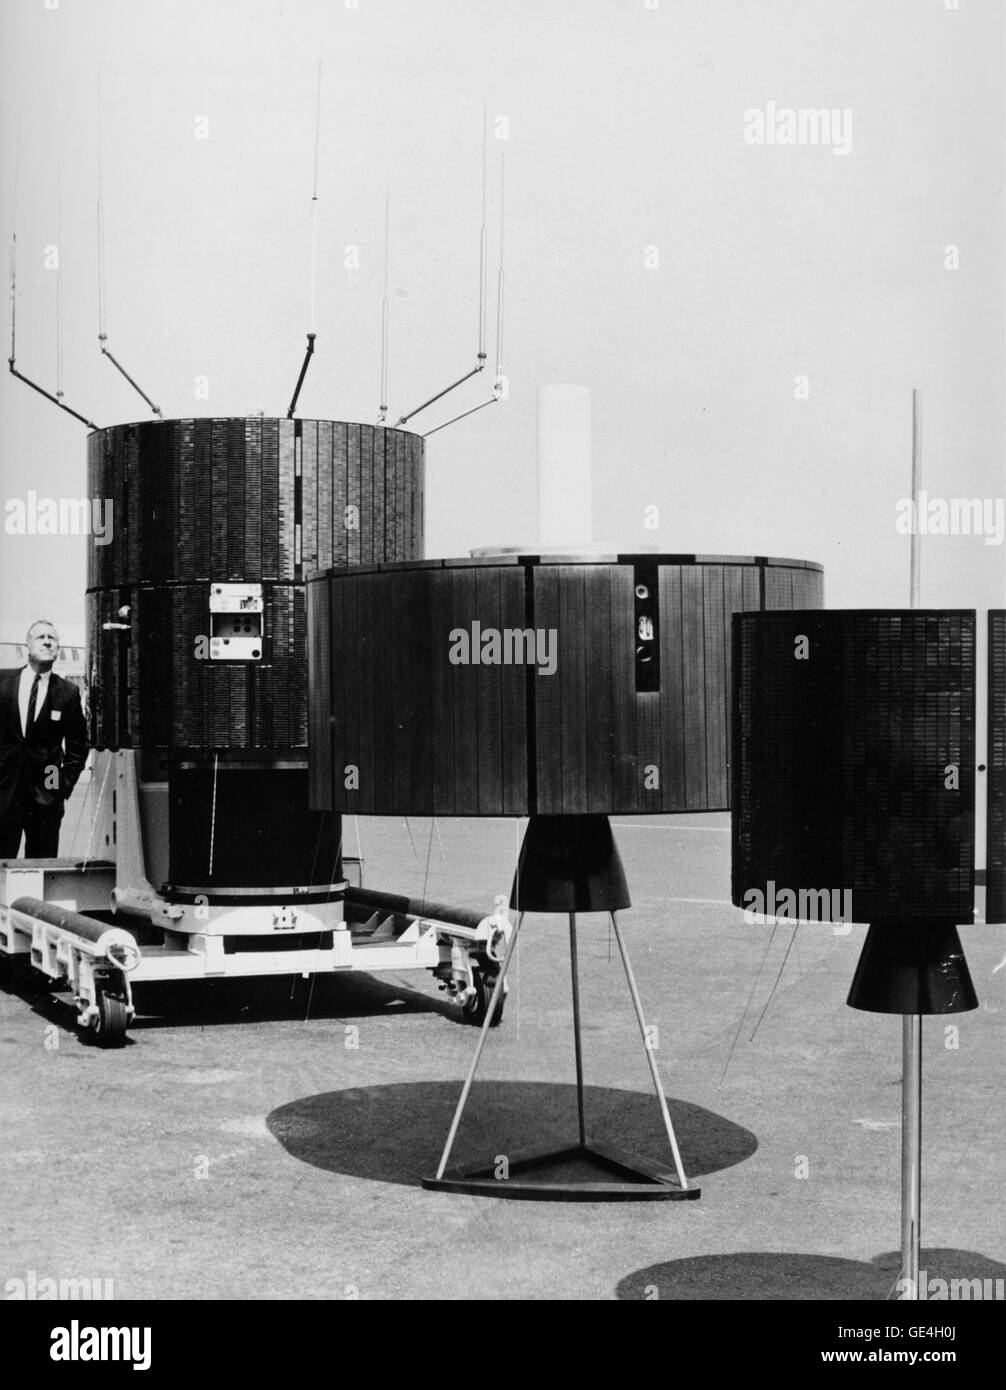 (October 16, 1968) The replicas of the covey (flock) of synchronous communication satellites that were used to televise the 19th Olympic Games from Mexico City to audiences in Europe and Japan. The satellites are shown at Hughes Aircraft Company, Culver City, California where they were built for NASA and Comsat Corporation. In the center is a full- scale model of the Intelsat II satellite, which was used by Comsat to send color TV direct to Japan via a Hughes ground station installed near San Jose, California. Left of Intelsat is the NASA's ATS-3 (Application Technology Satellites), which tran Stock Photo